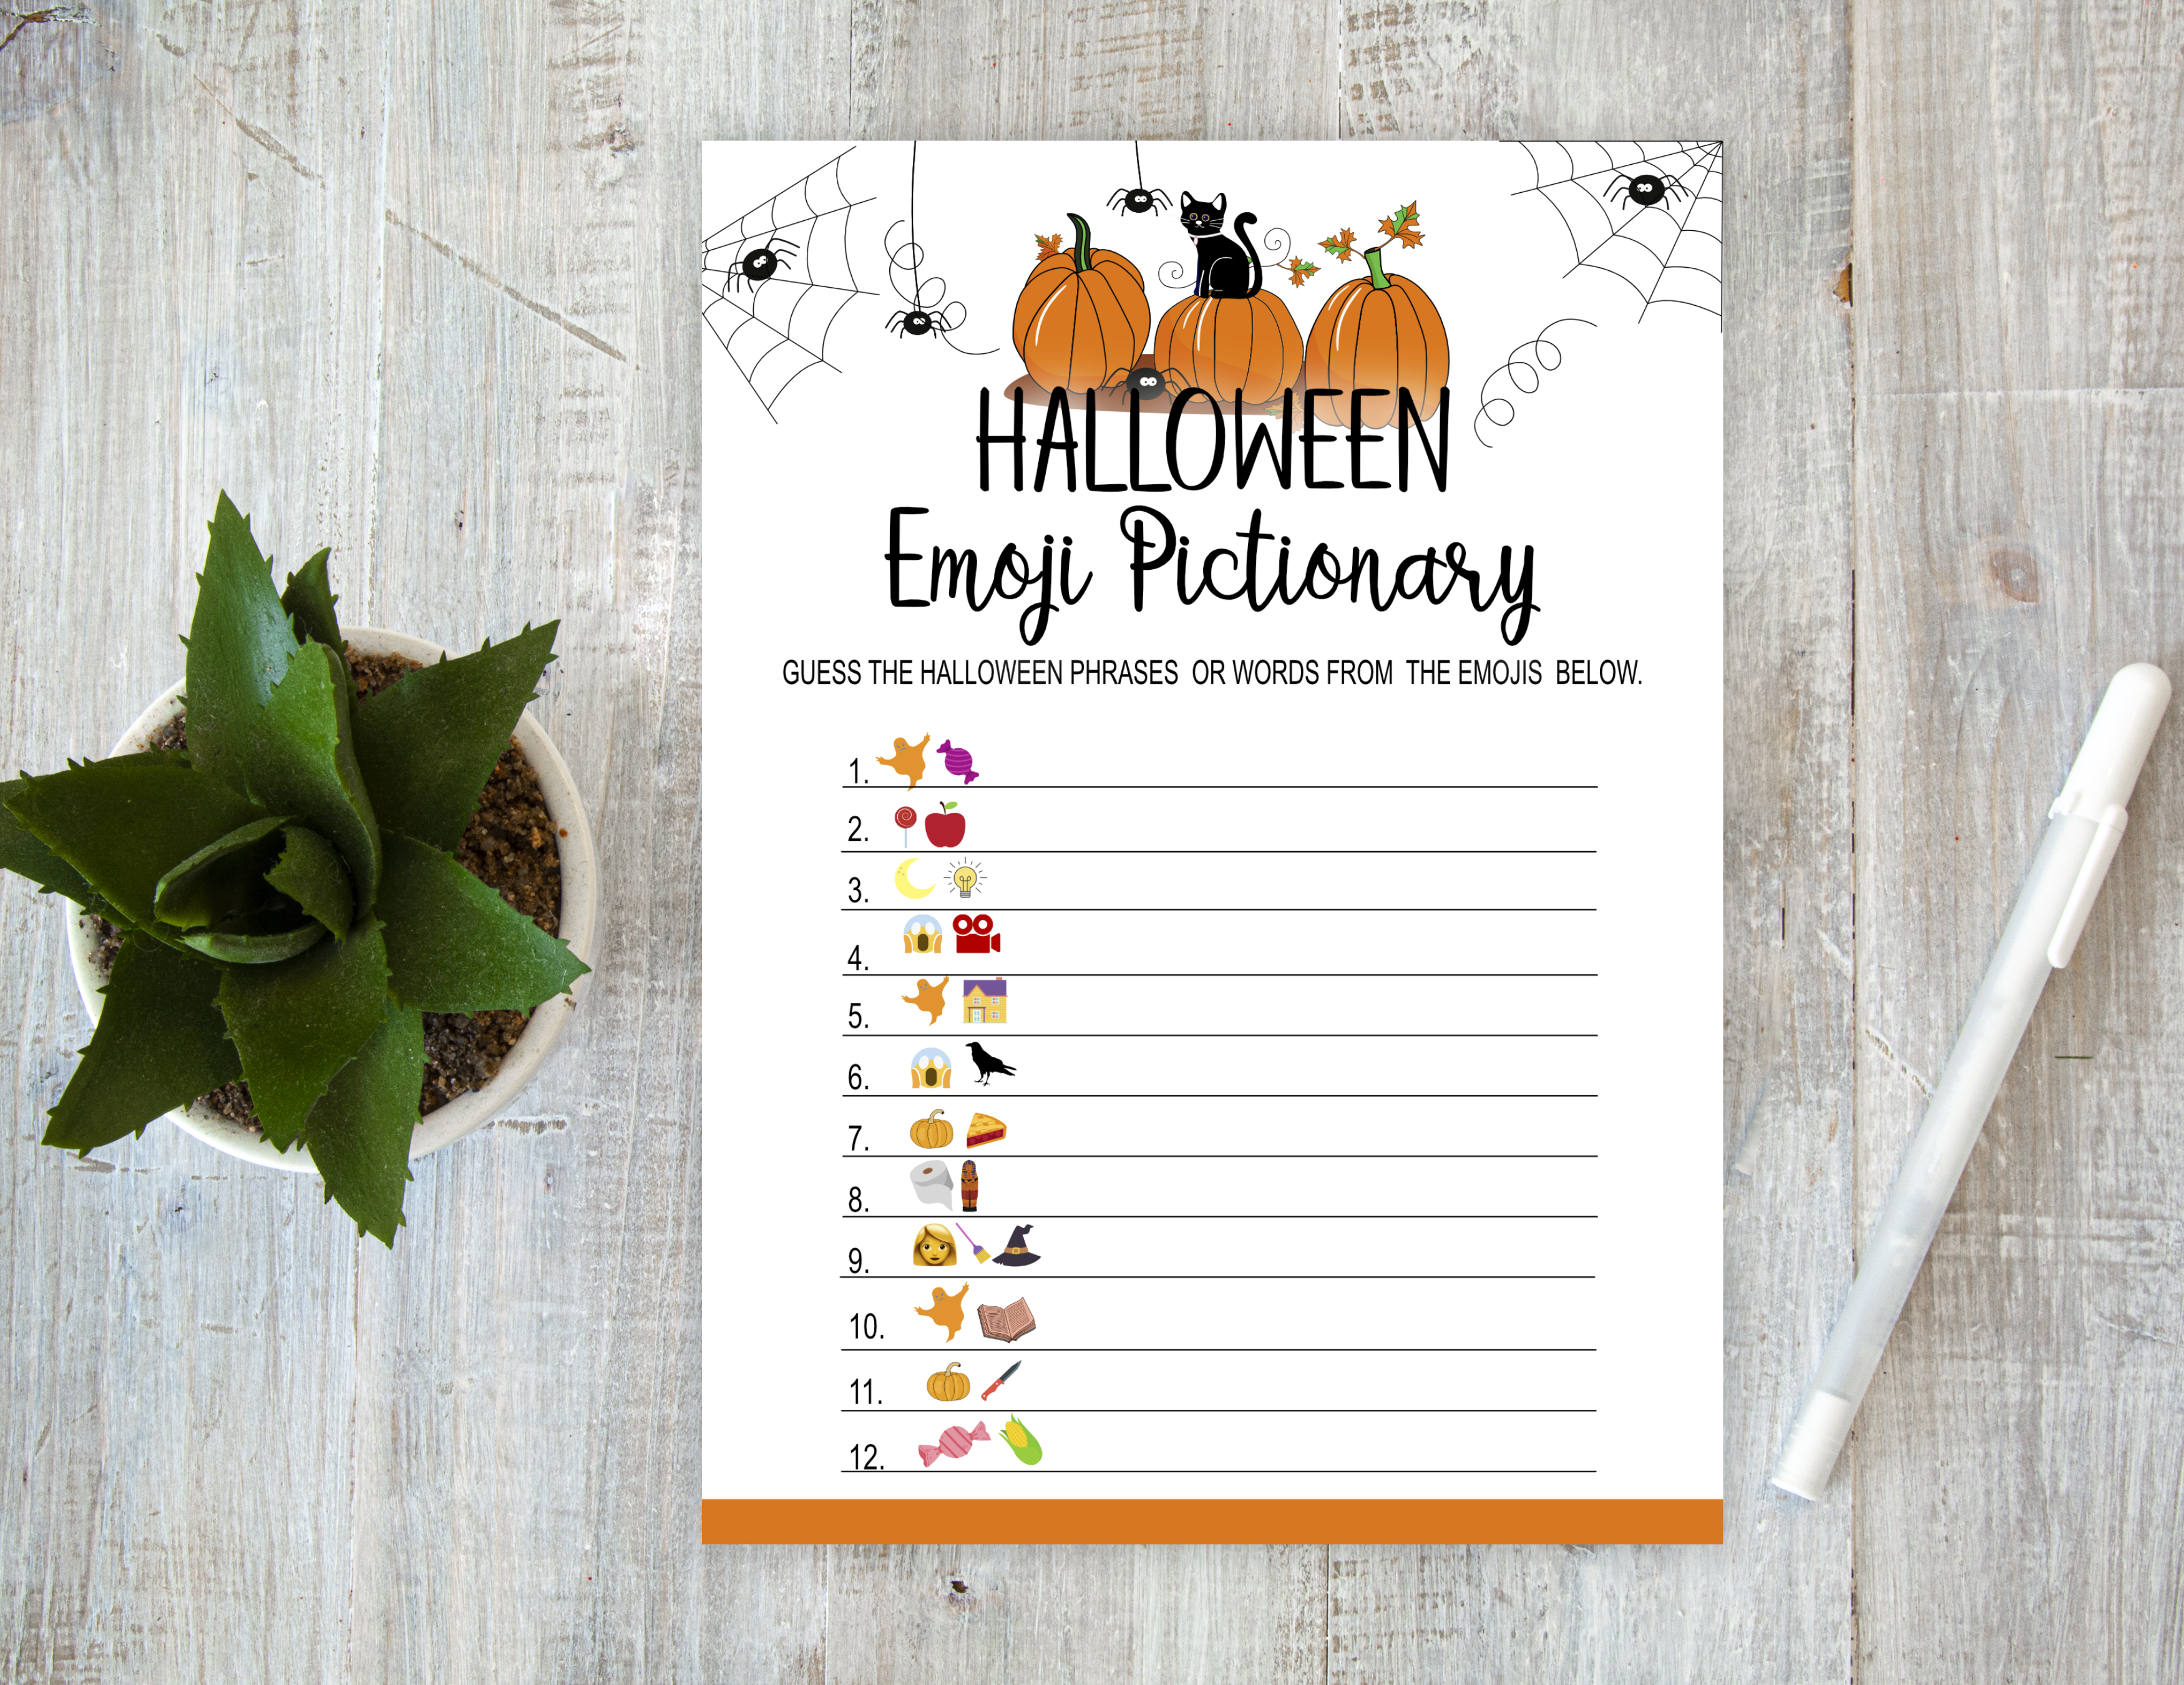 Halloween Halloween Emoji Pictionary – Printable Party Game for Spooky Fun Emoji Pictionary for Halloween